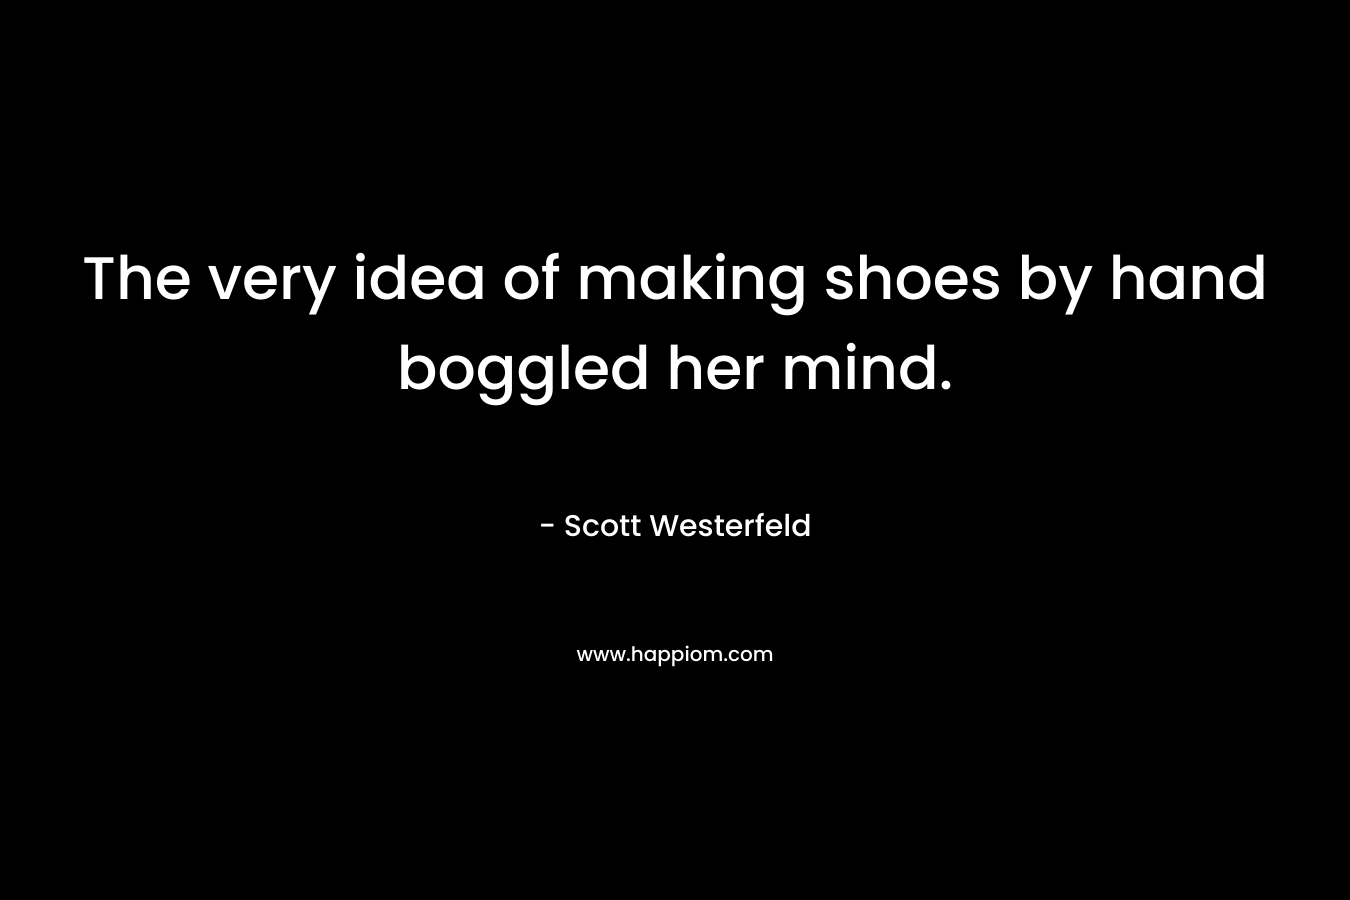 The very idea of making shoes by hand boggled her mind.